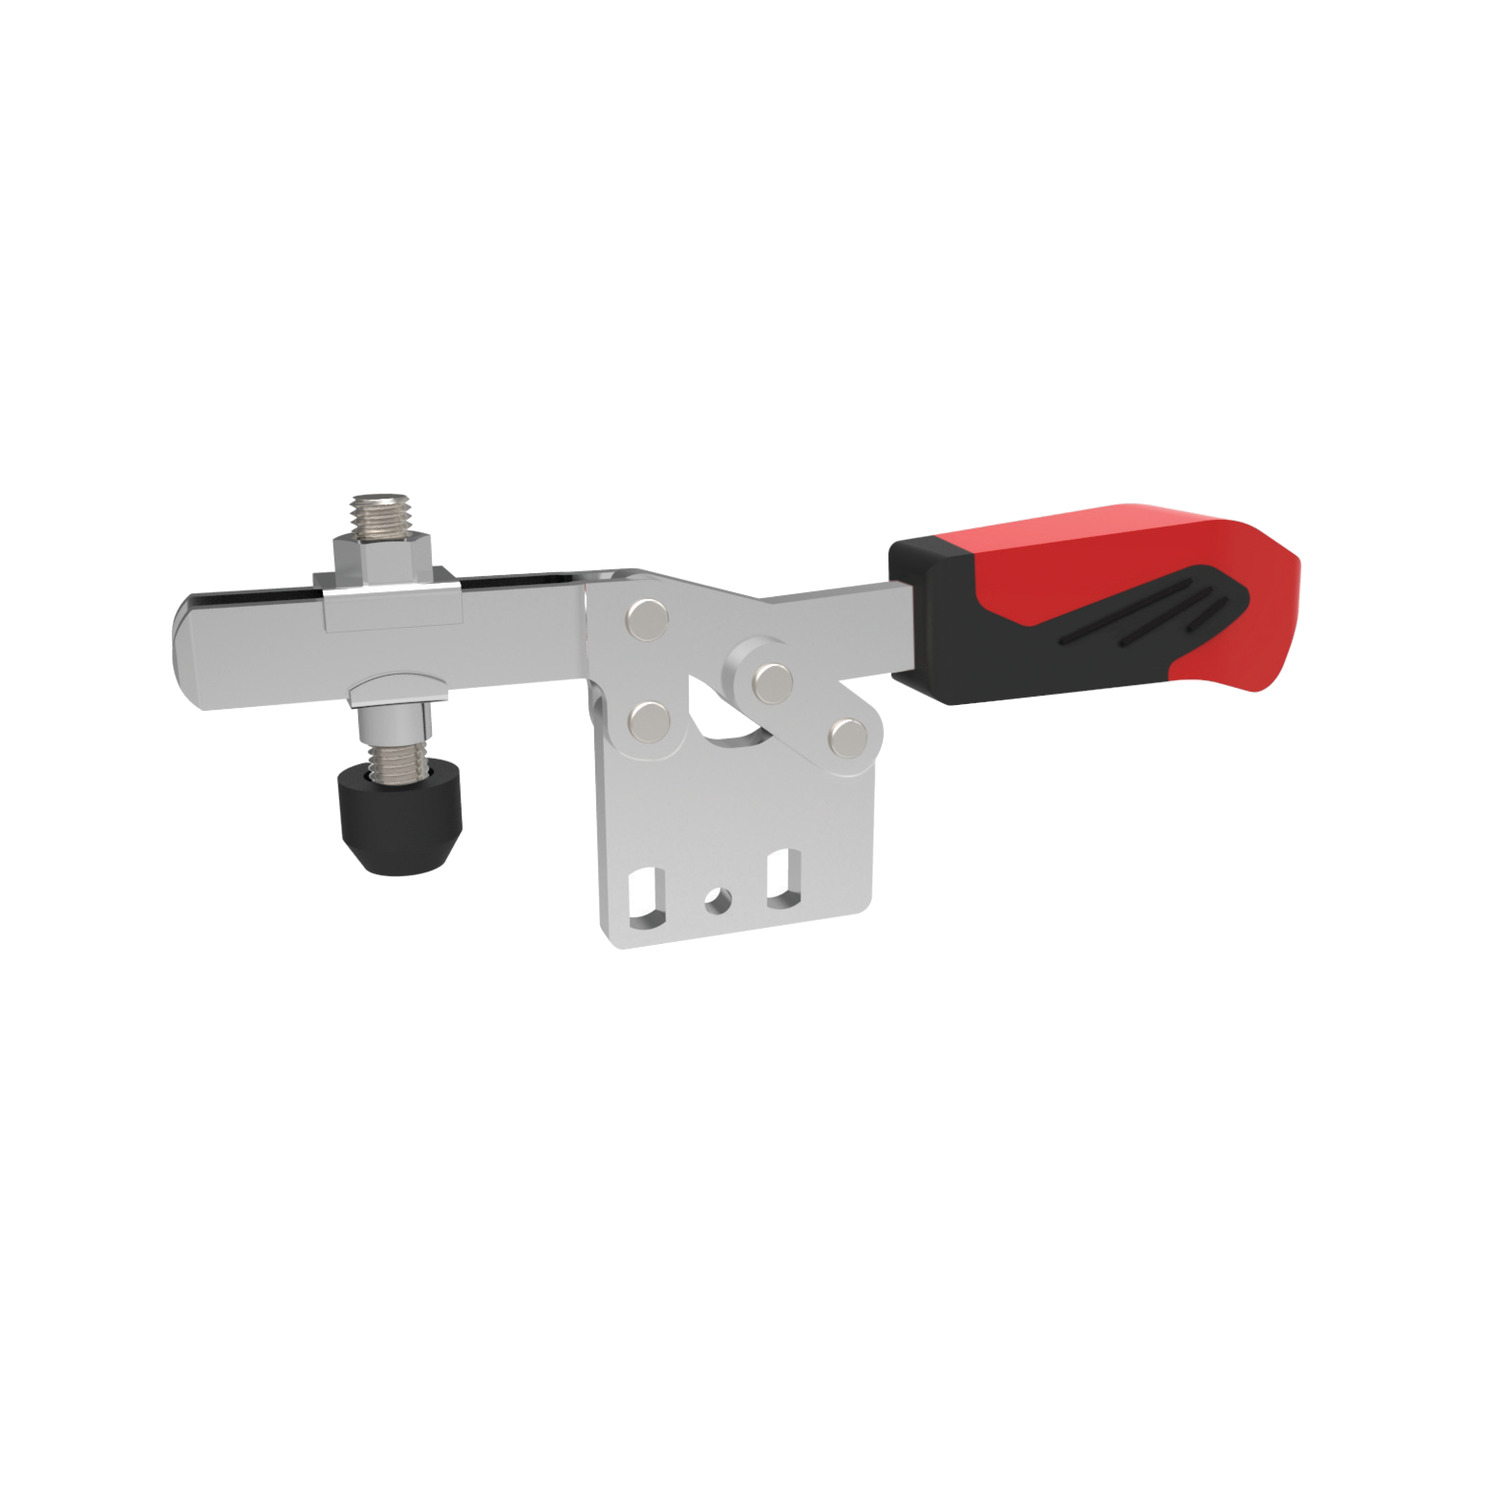 41050.1 - Horizontal Acting Toggle Clamps